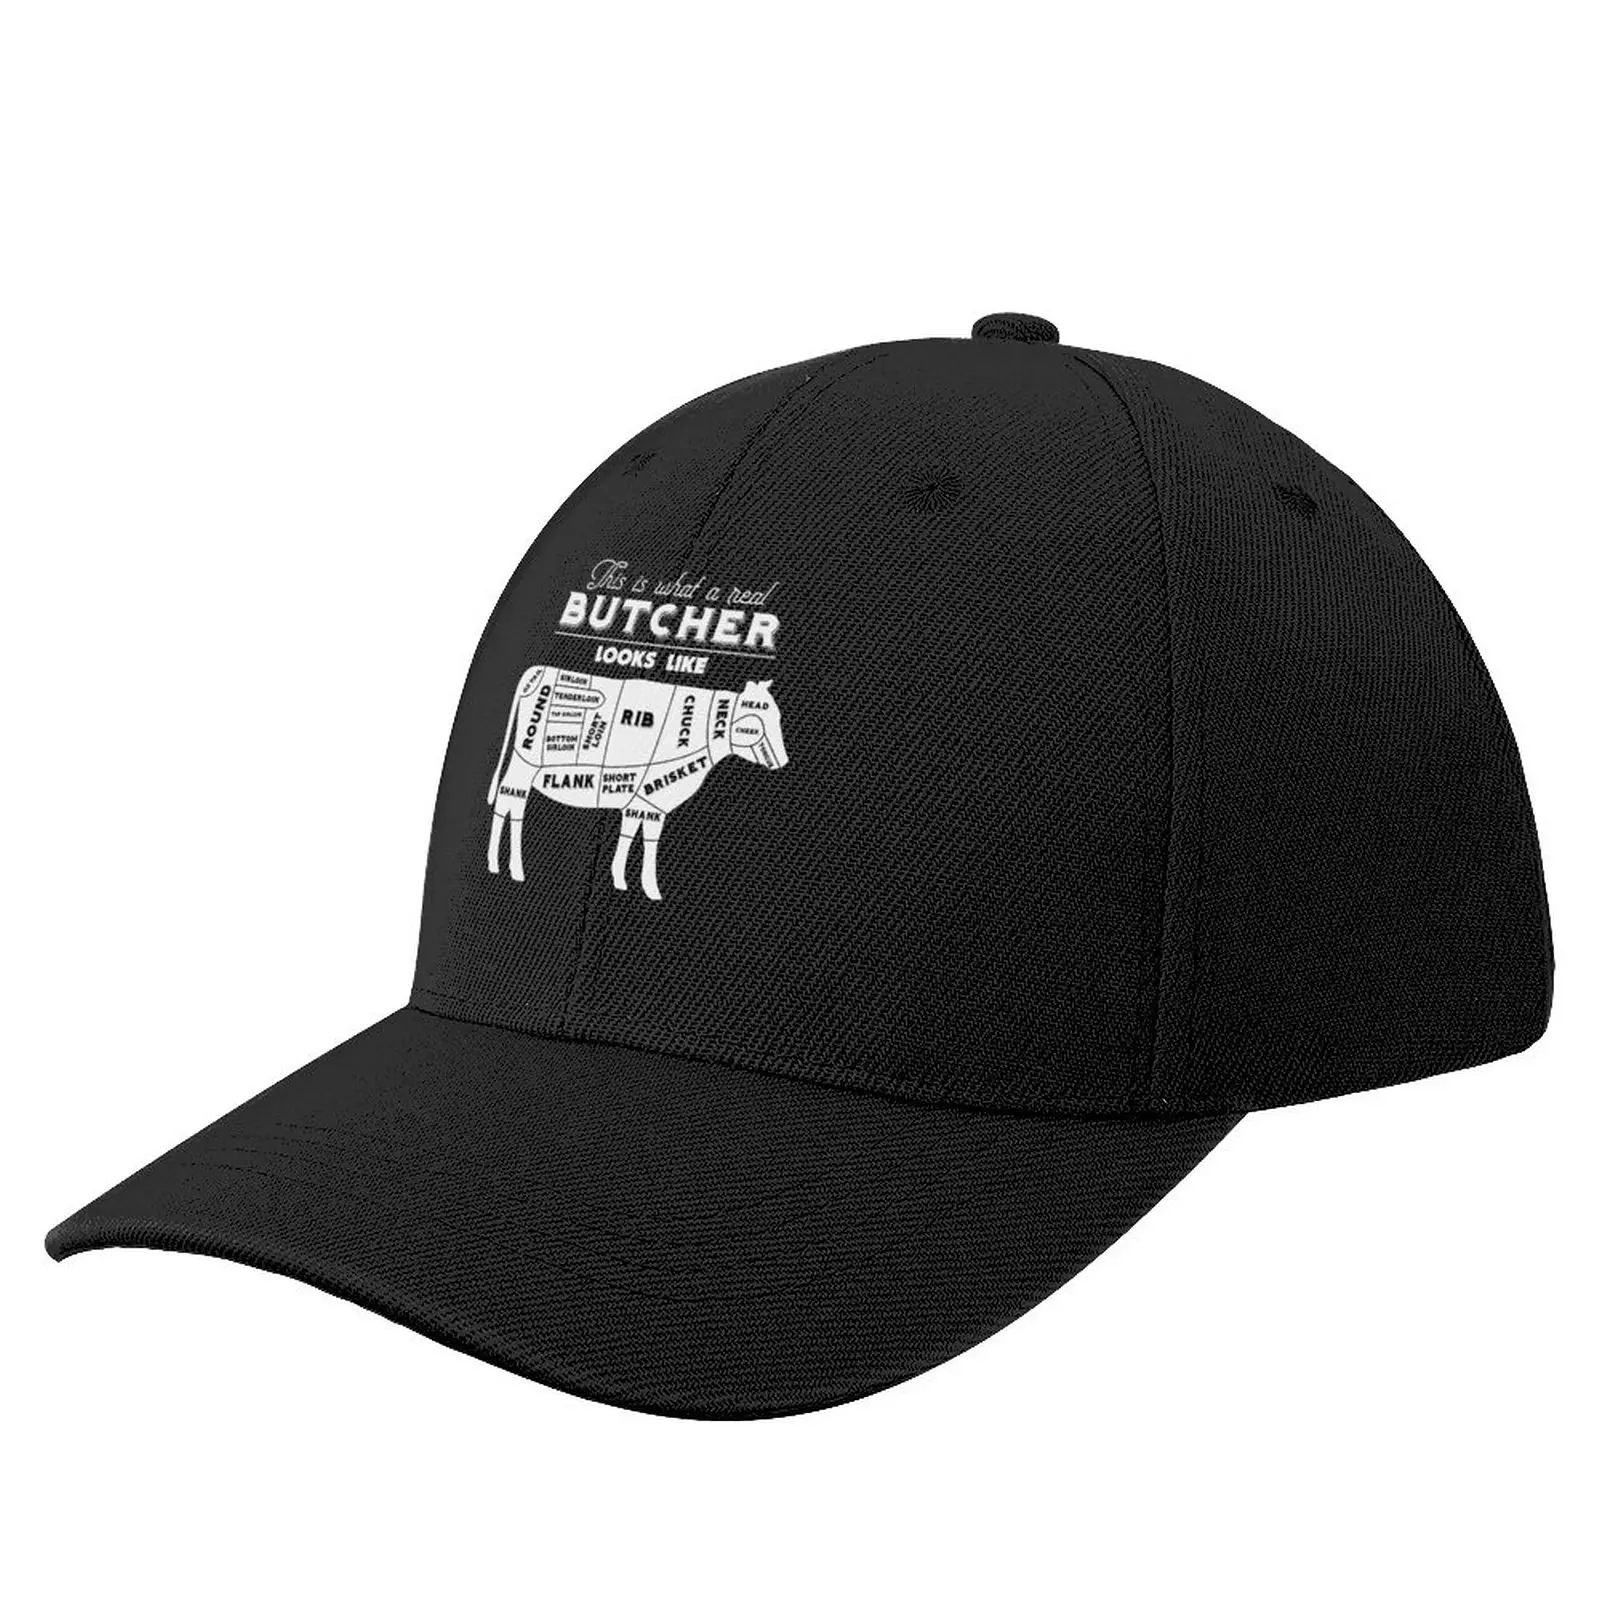 

This is What a Real Butcher Looks Like Funny Quote Baseball Cap hard hat Hats Baseball Cap Men's Hats Women's